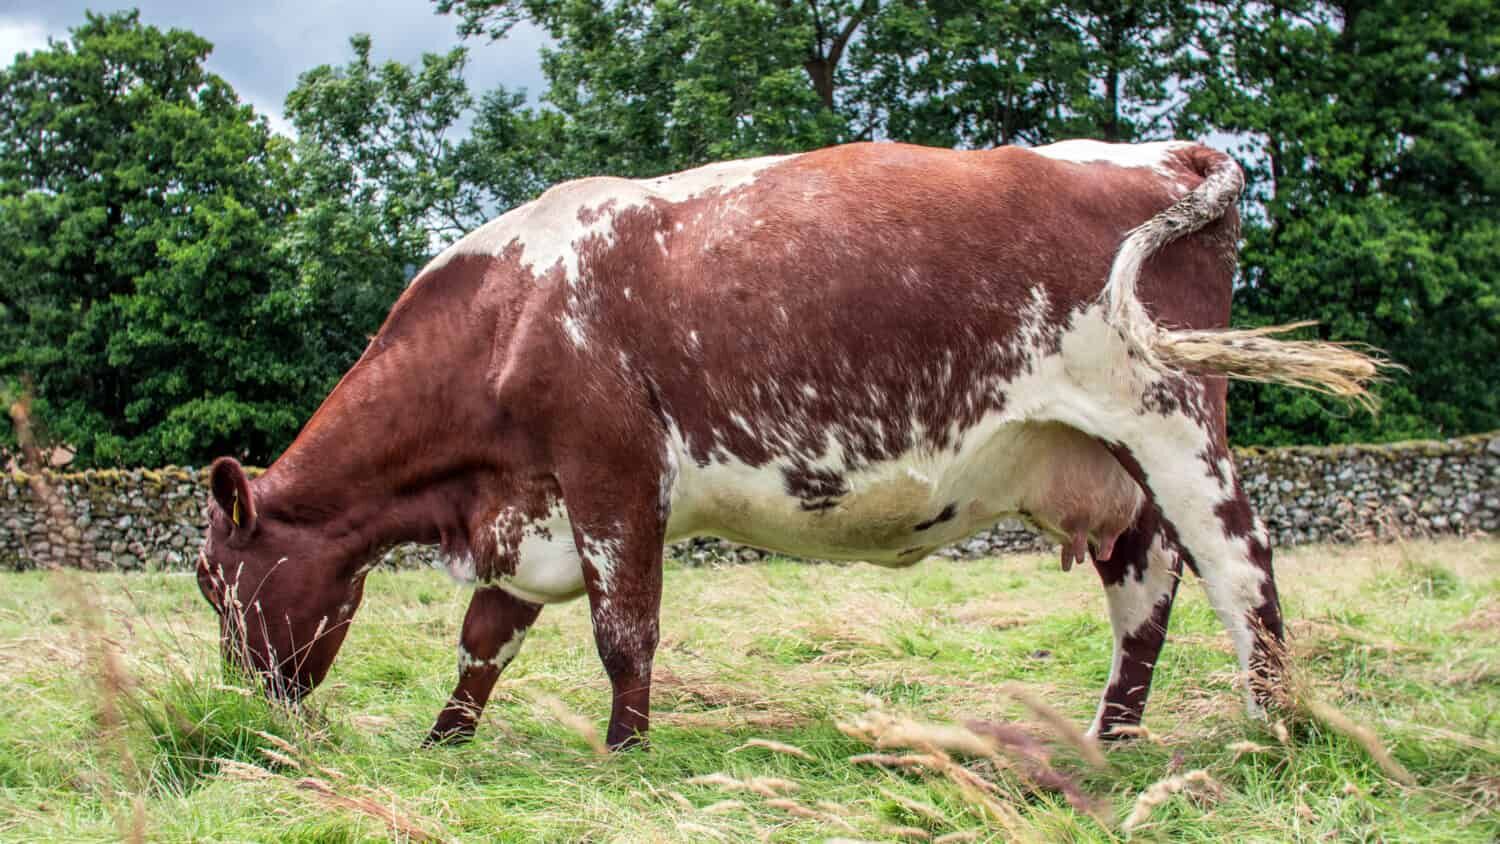 Shorthorn cows are great breeders that can do farmers well long-term.